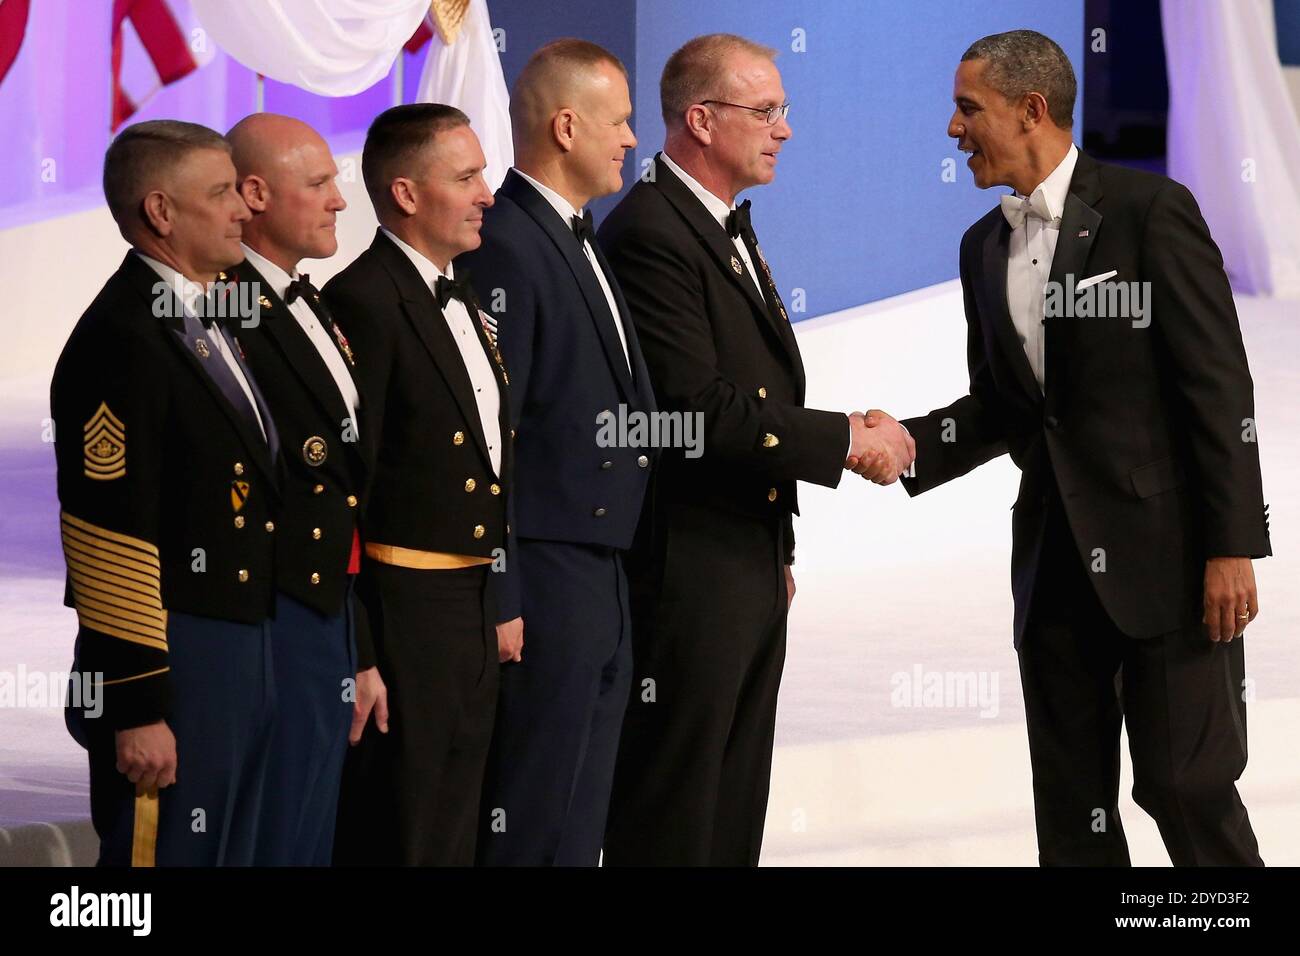 U.S. President Barack Obama (R) thanks (L-R) Sergeant Major of the Army Raymond Chandler, Sergeant Major of the Marine Corps Micheal Barrett, Master Chief Petty Officer of the Navy Michael Stevens, Chief Master Sergeant of the Air Force James Roy and Master Chief Petty Officer of the Coast Guard Michael Leavitt during the Commander-In-Chief Ball at the Walter Washington Convention Center in Washington, DC on January 21, 2013. President Obama started his second term by taking the Oath of Office earlier in the day during a ceremony on the West Front of the U.S. Capitol. Photo by Chip Somodevilla Stock Photo